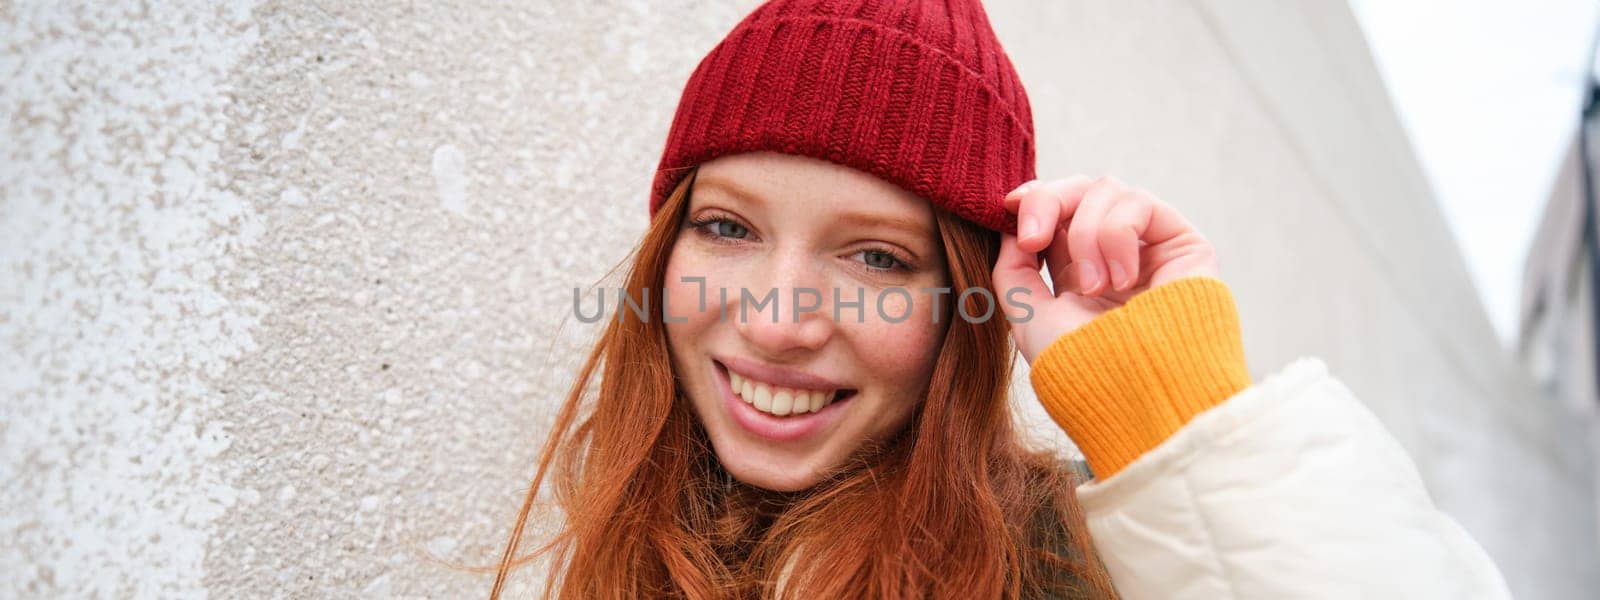 Stylish redhead girl in red hat, smiles and looks happy, poses outdoors on street, looks relaxed and lively.